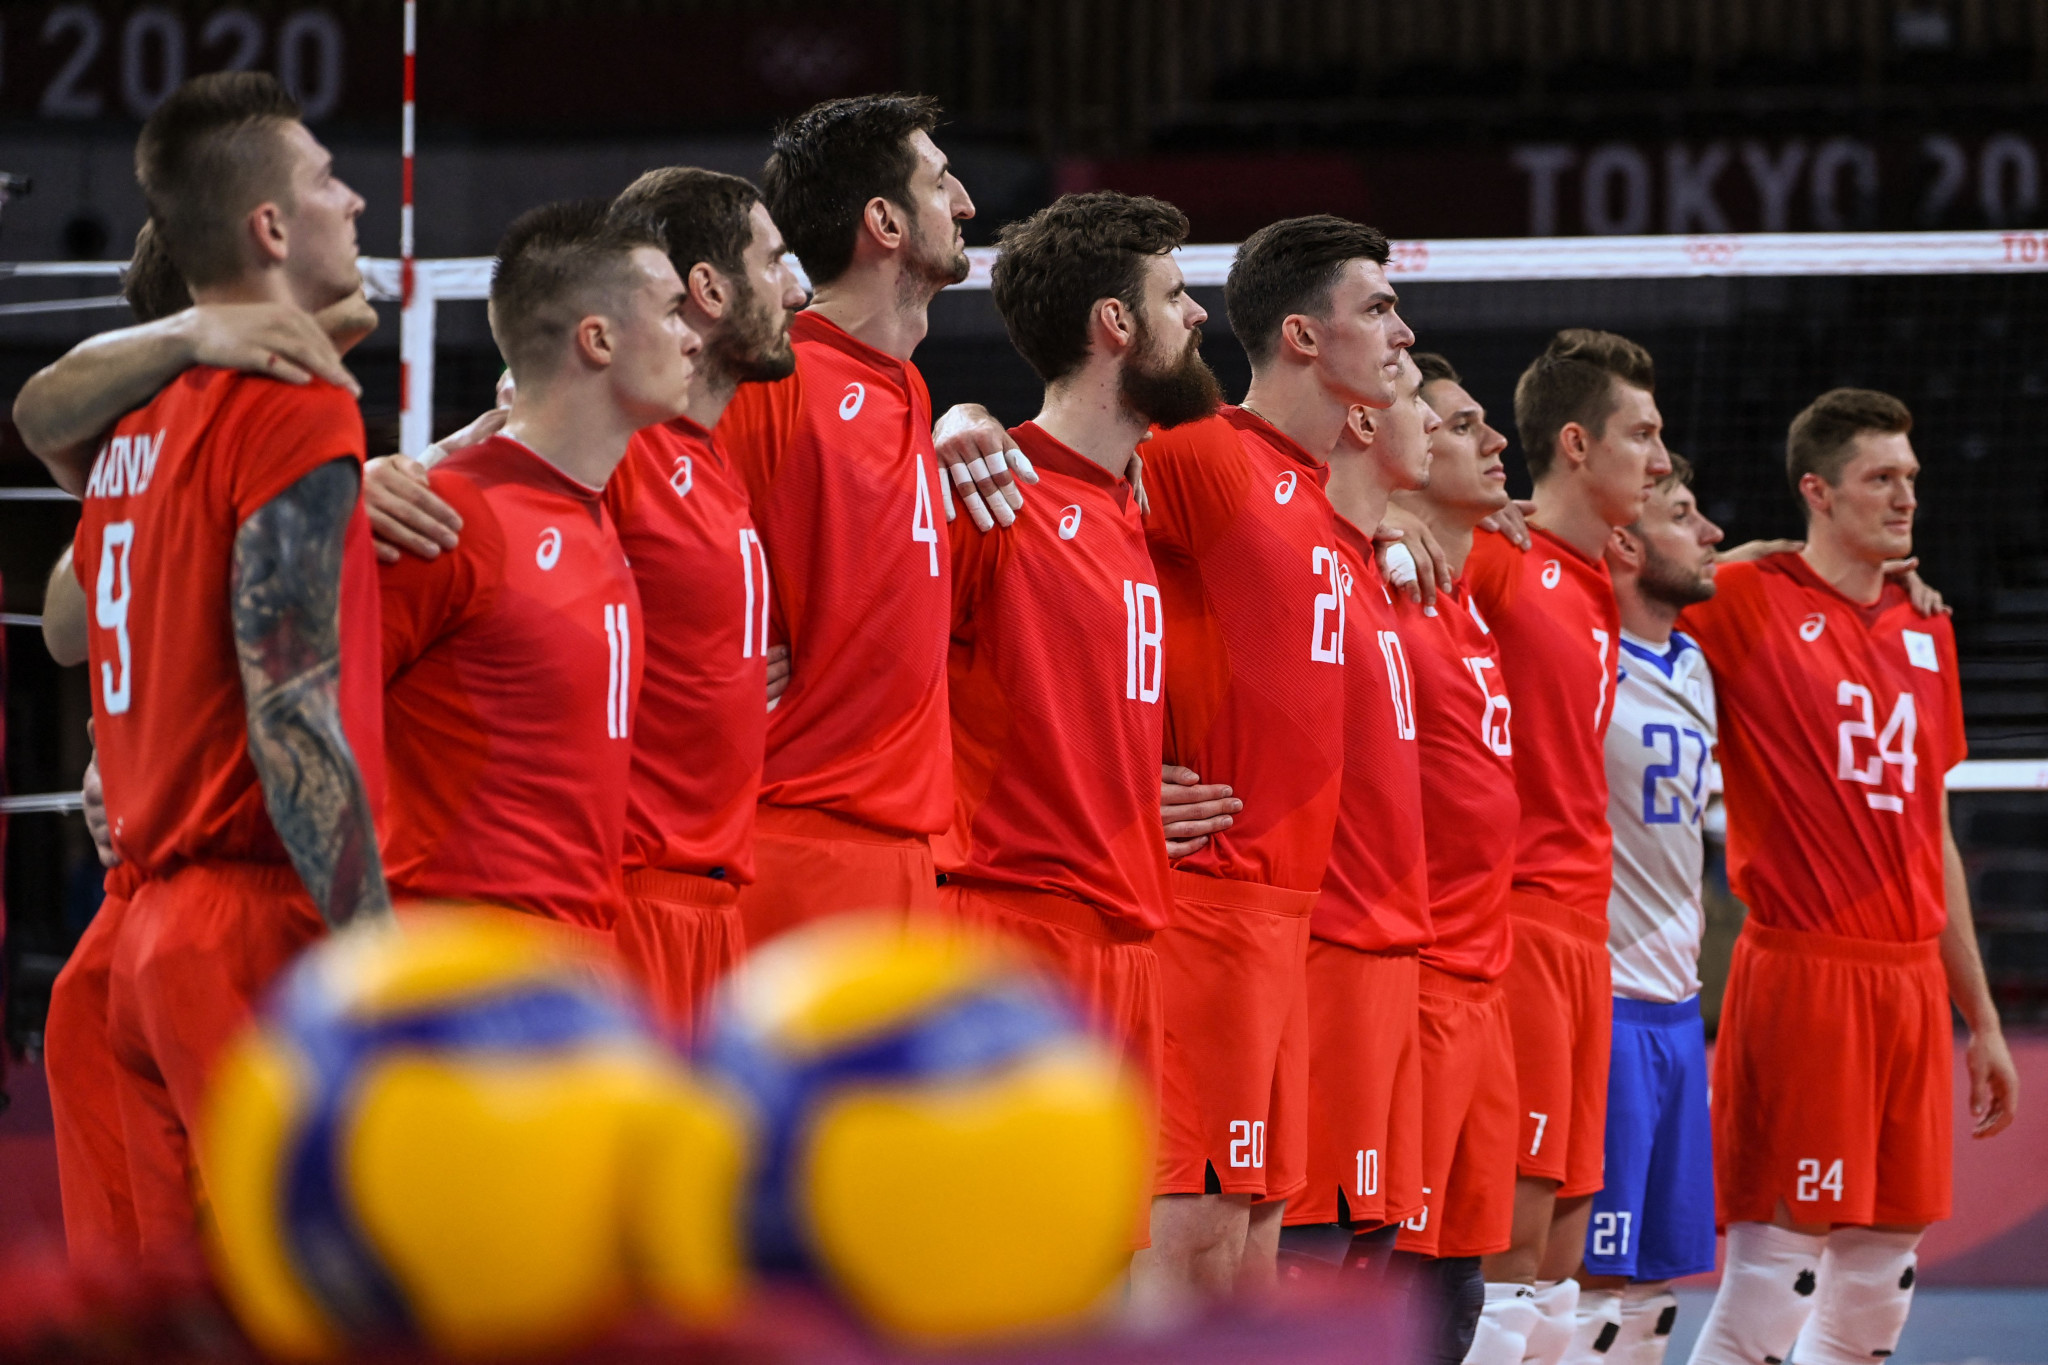 The ROC were men's volleyball silver medallists at Tokyo 2020, but have been omitted from Paris 2024 qualification tournaments ©Getty Images